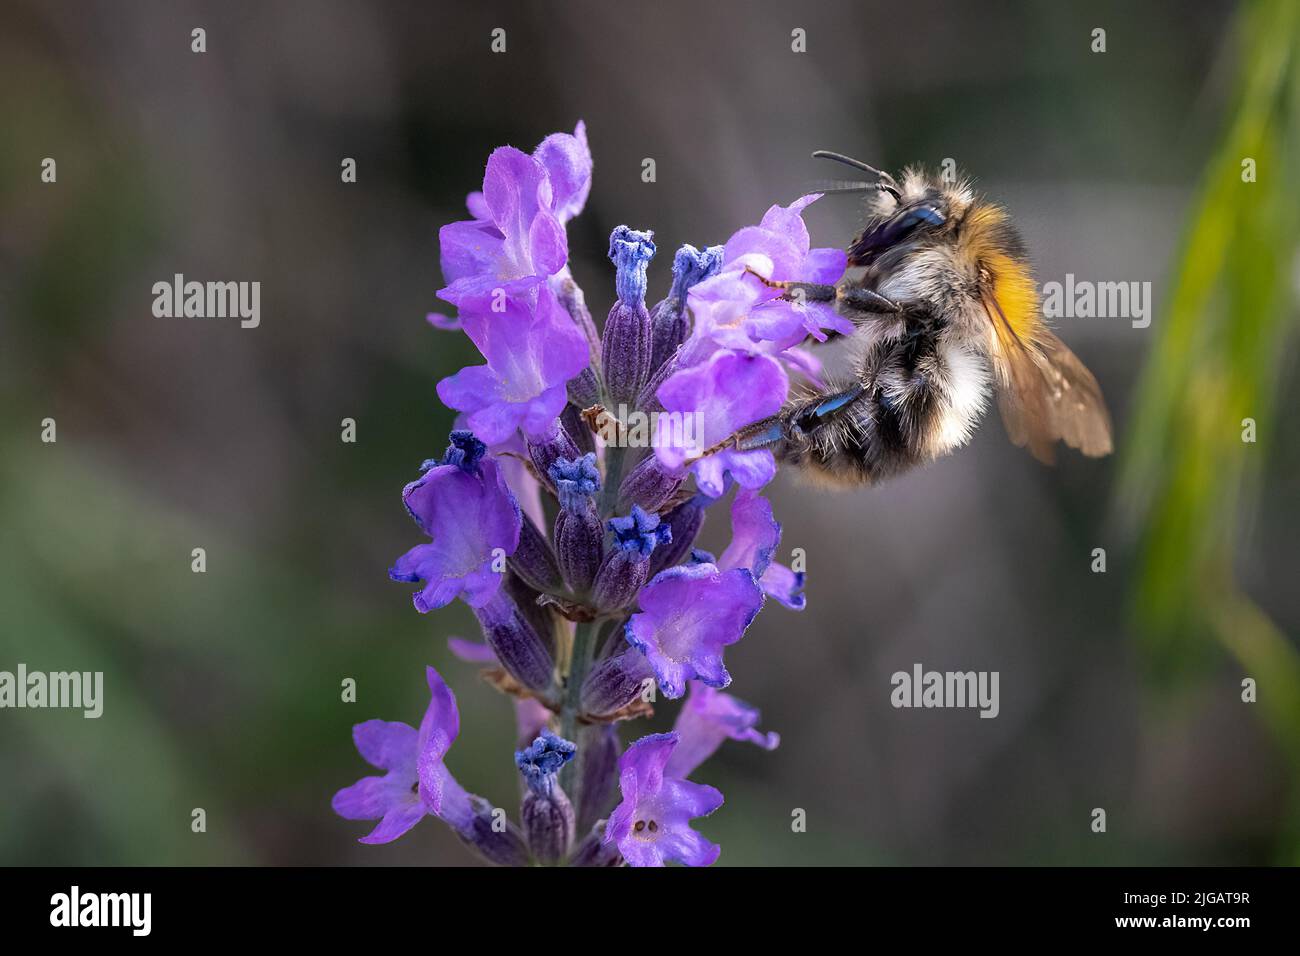 The large garden bumblebee or ruderal bumblebee pollinating a flower. Pollination is an essential part of plant reproduction. Stock Photo